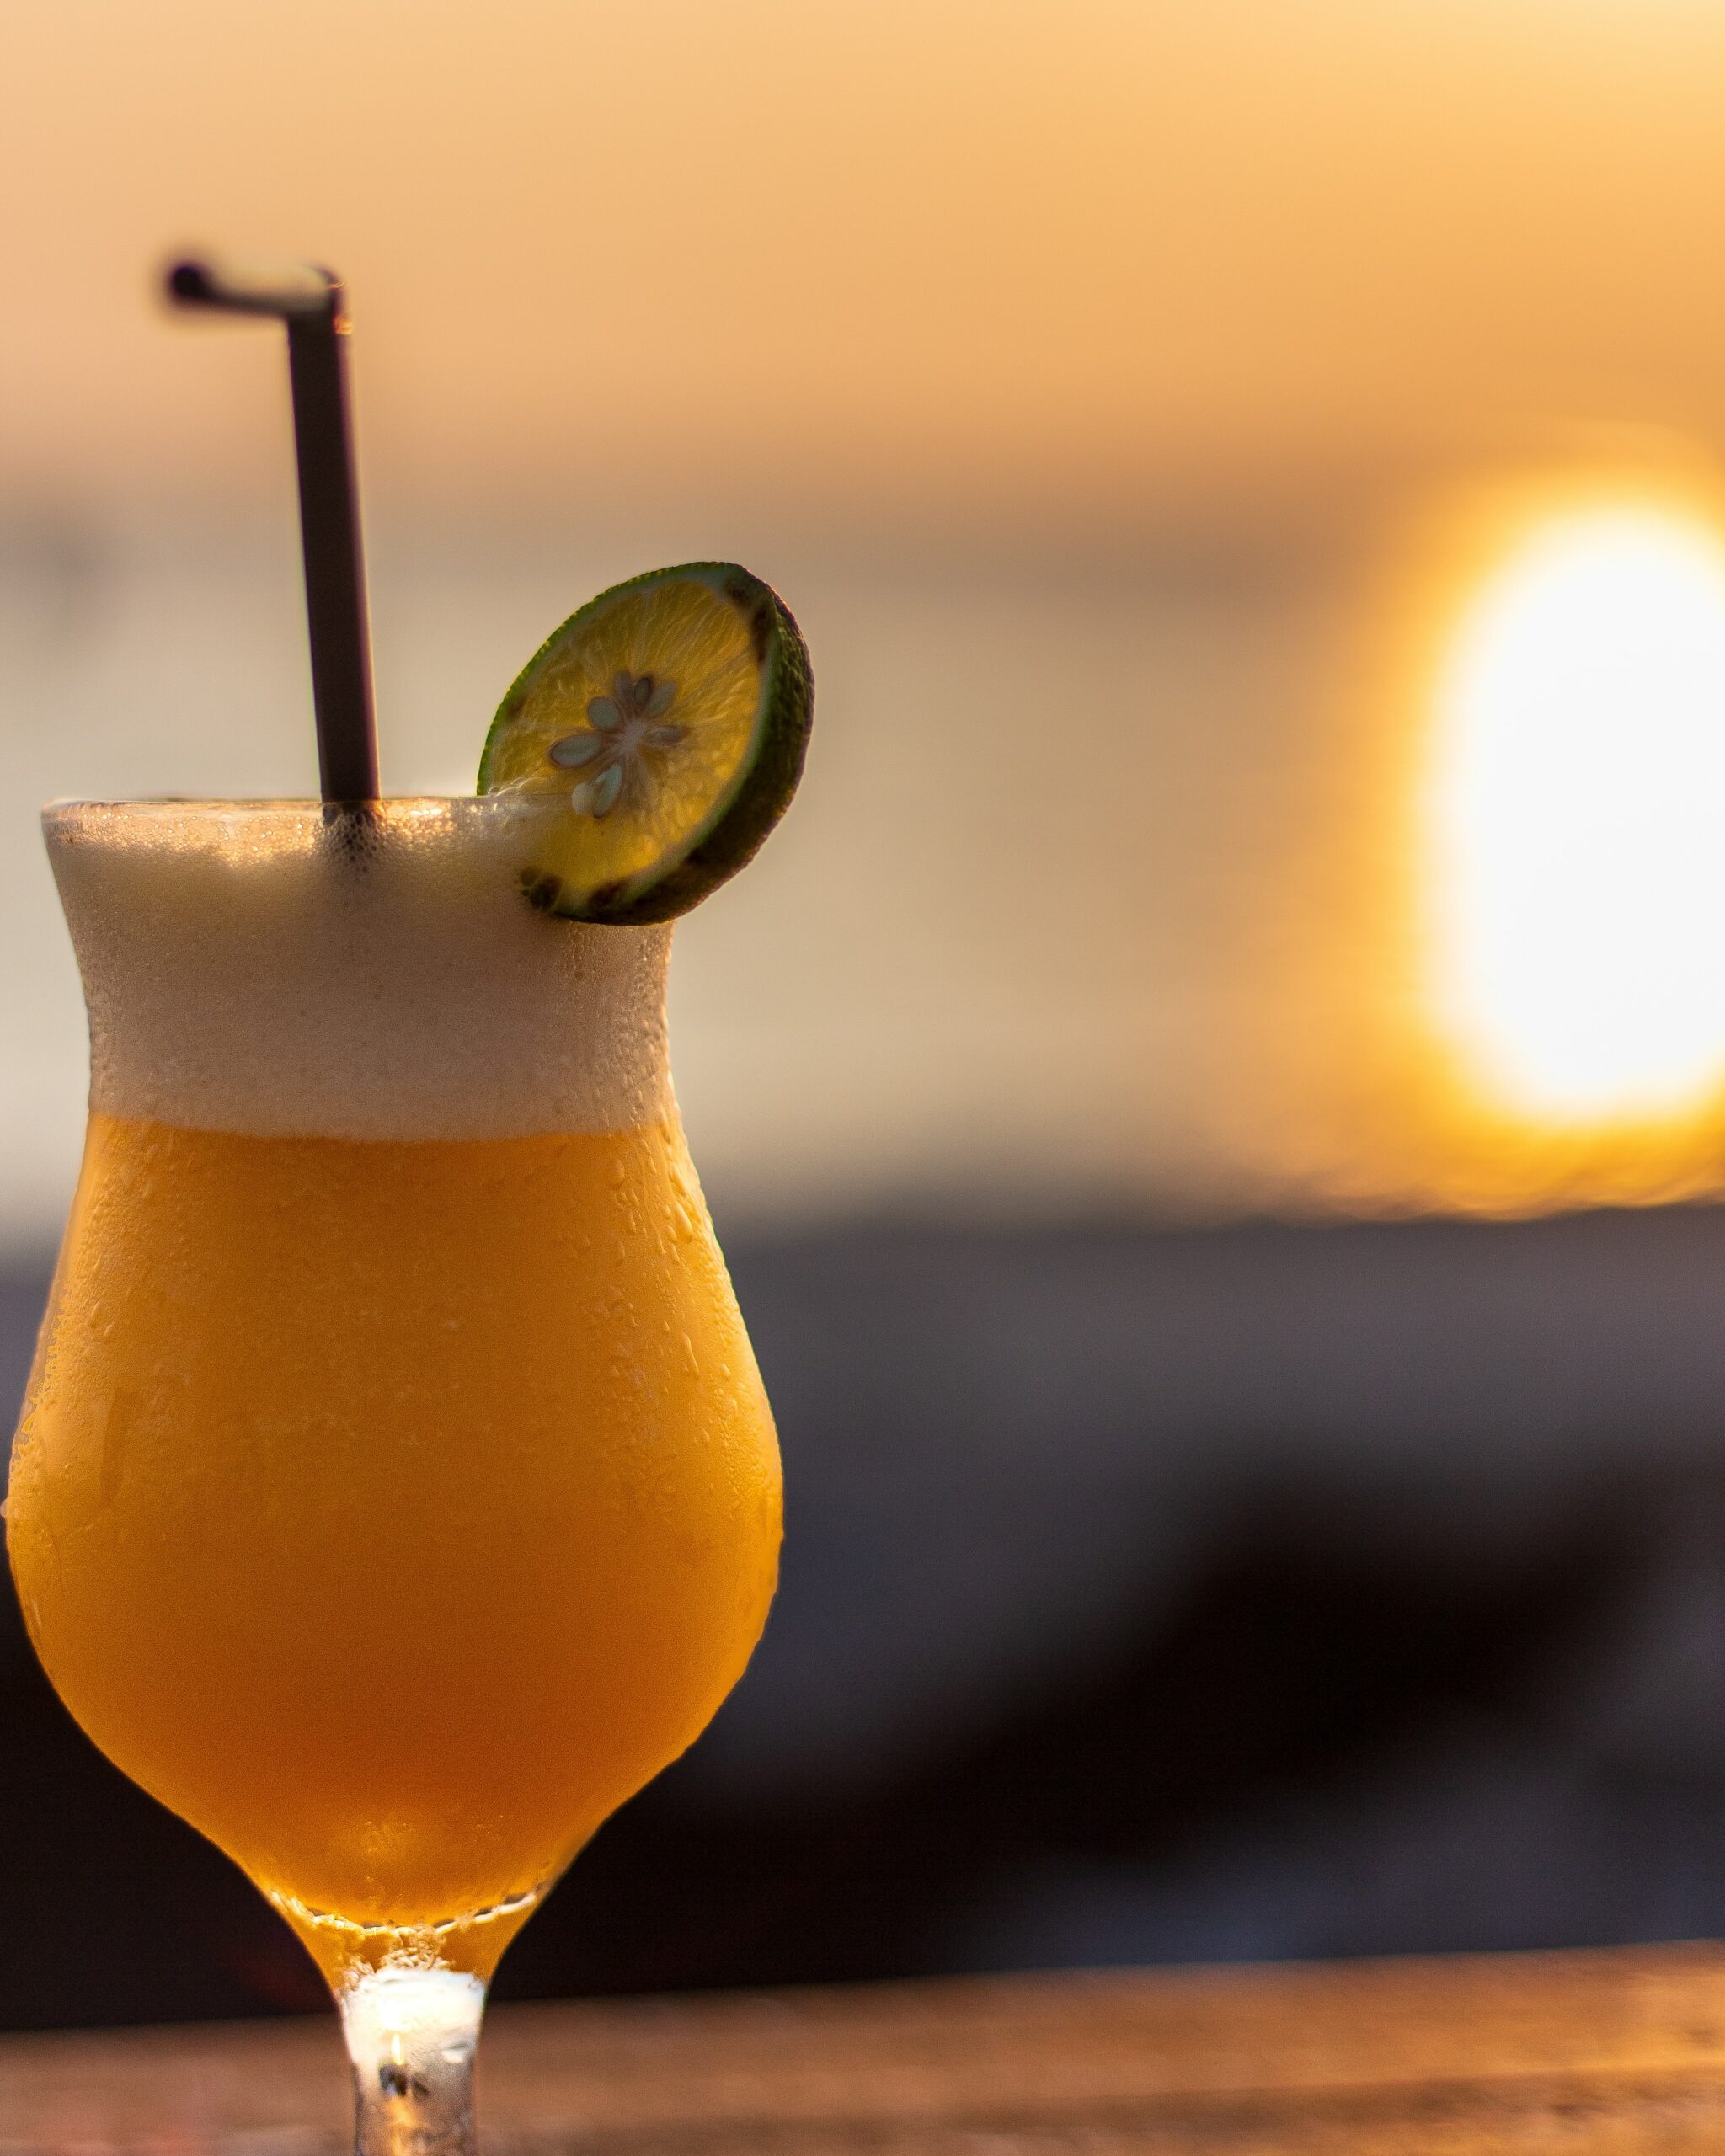 Mango cocktail with straw and lemon slice pictured at sunset